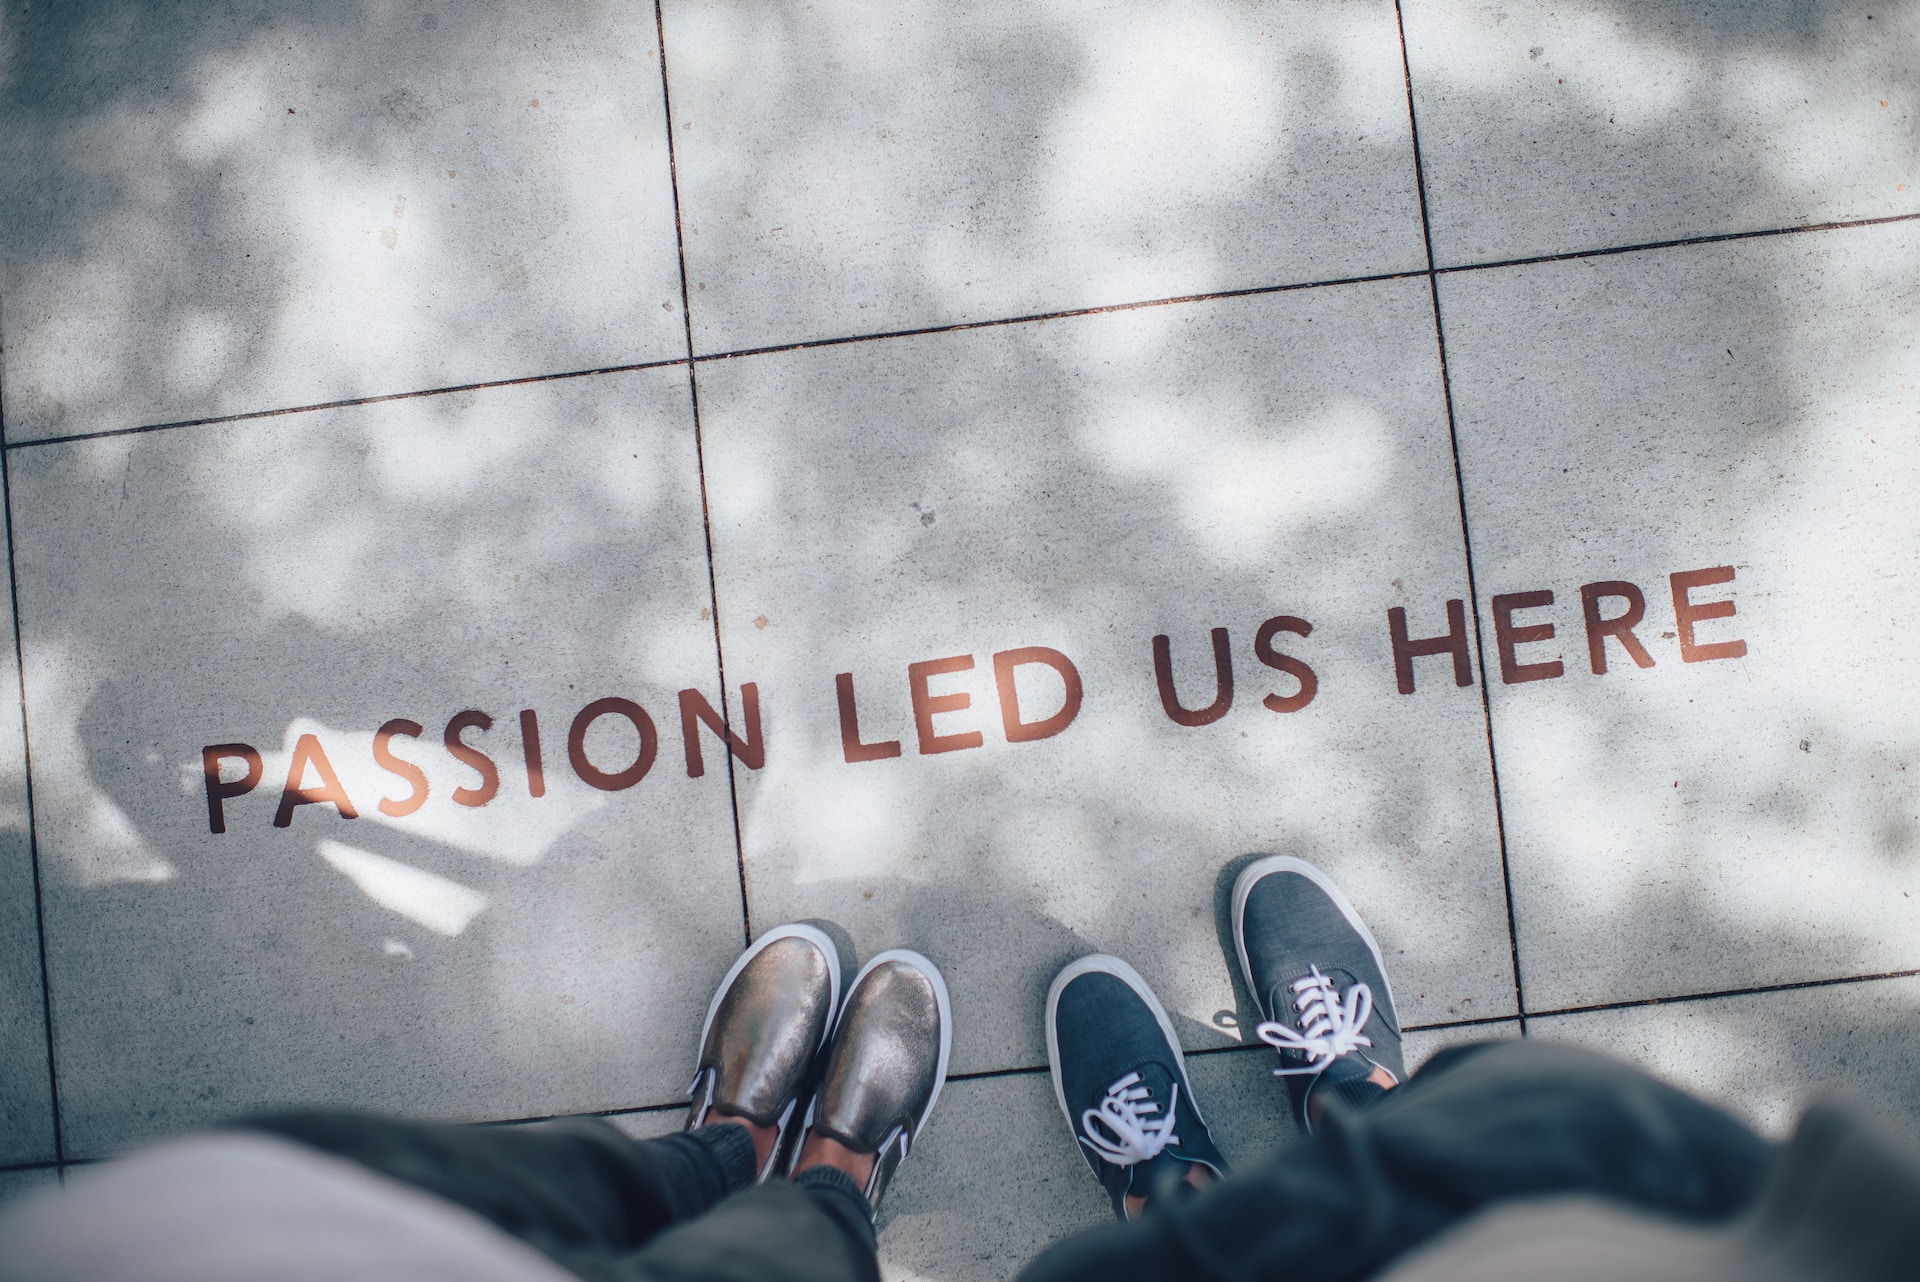 The phrase 'passion led us here' is displayed in a bold, red font on the ground